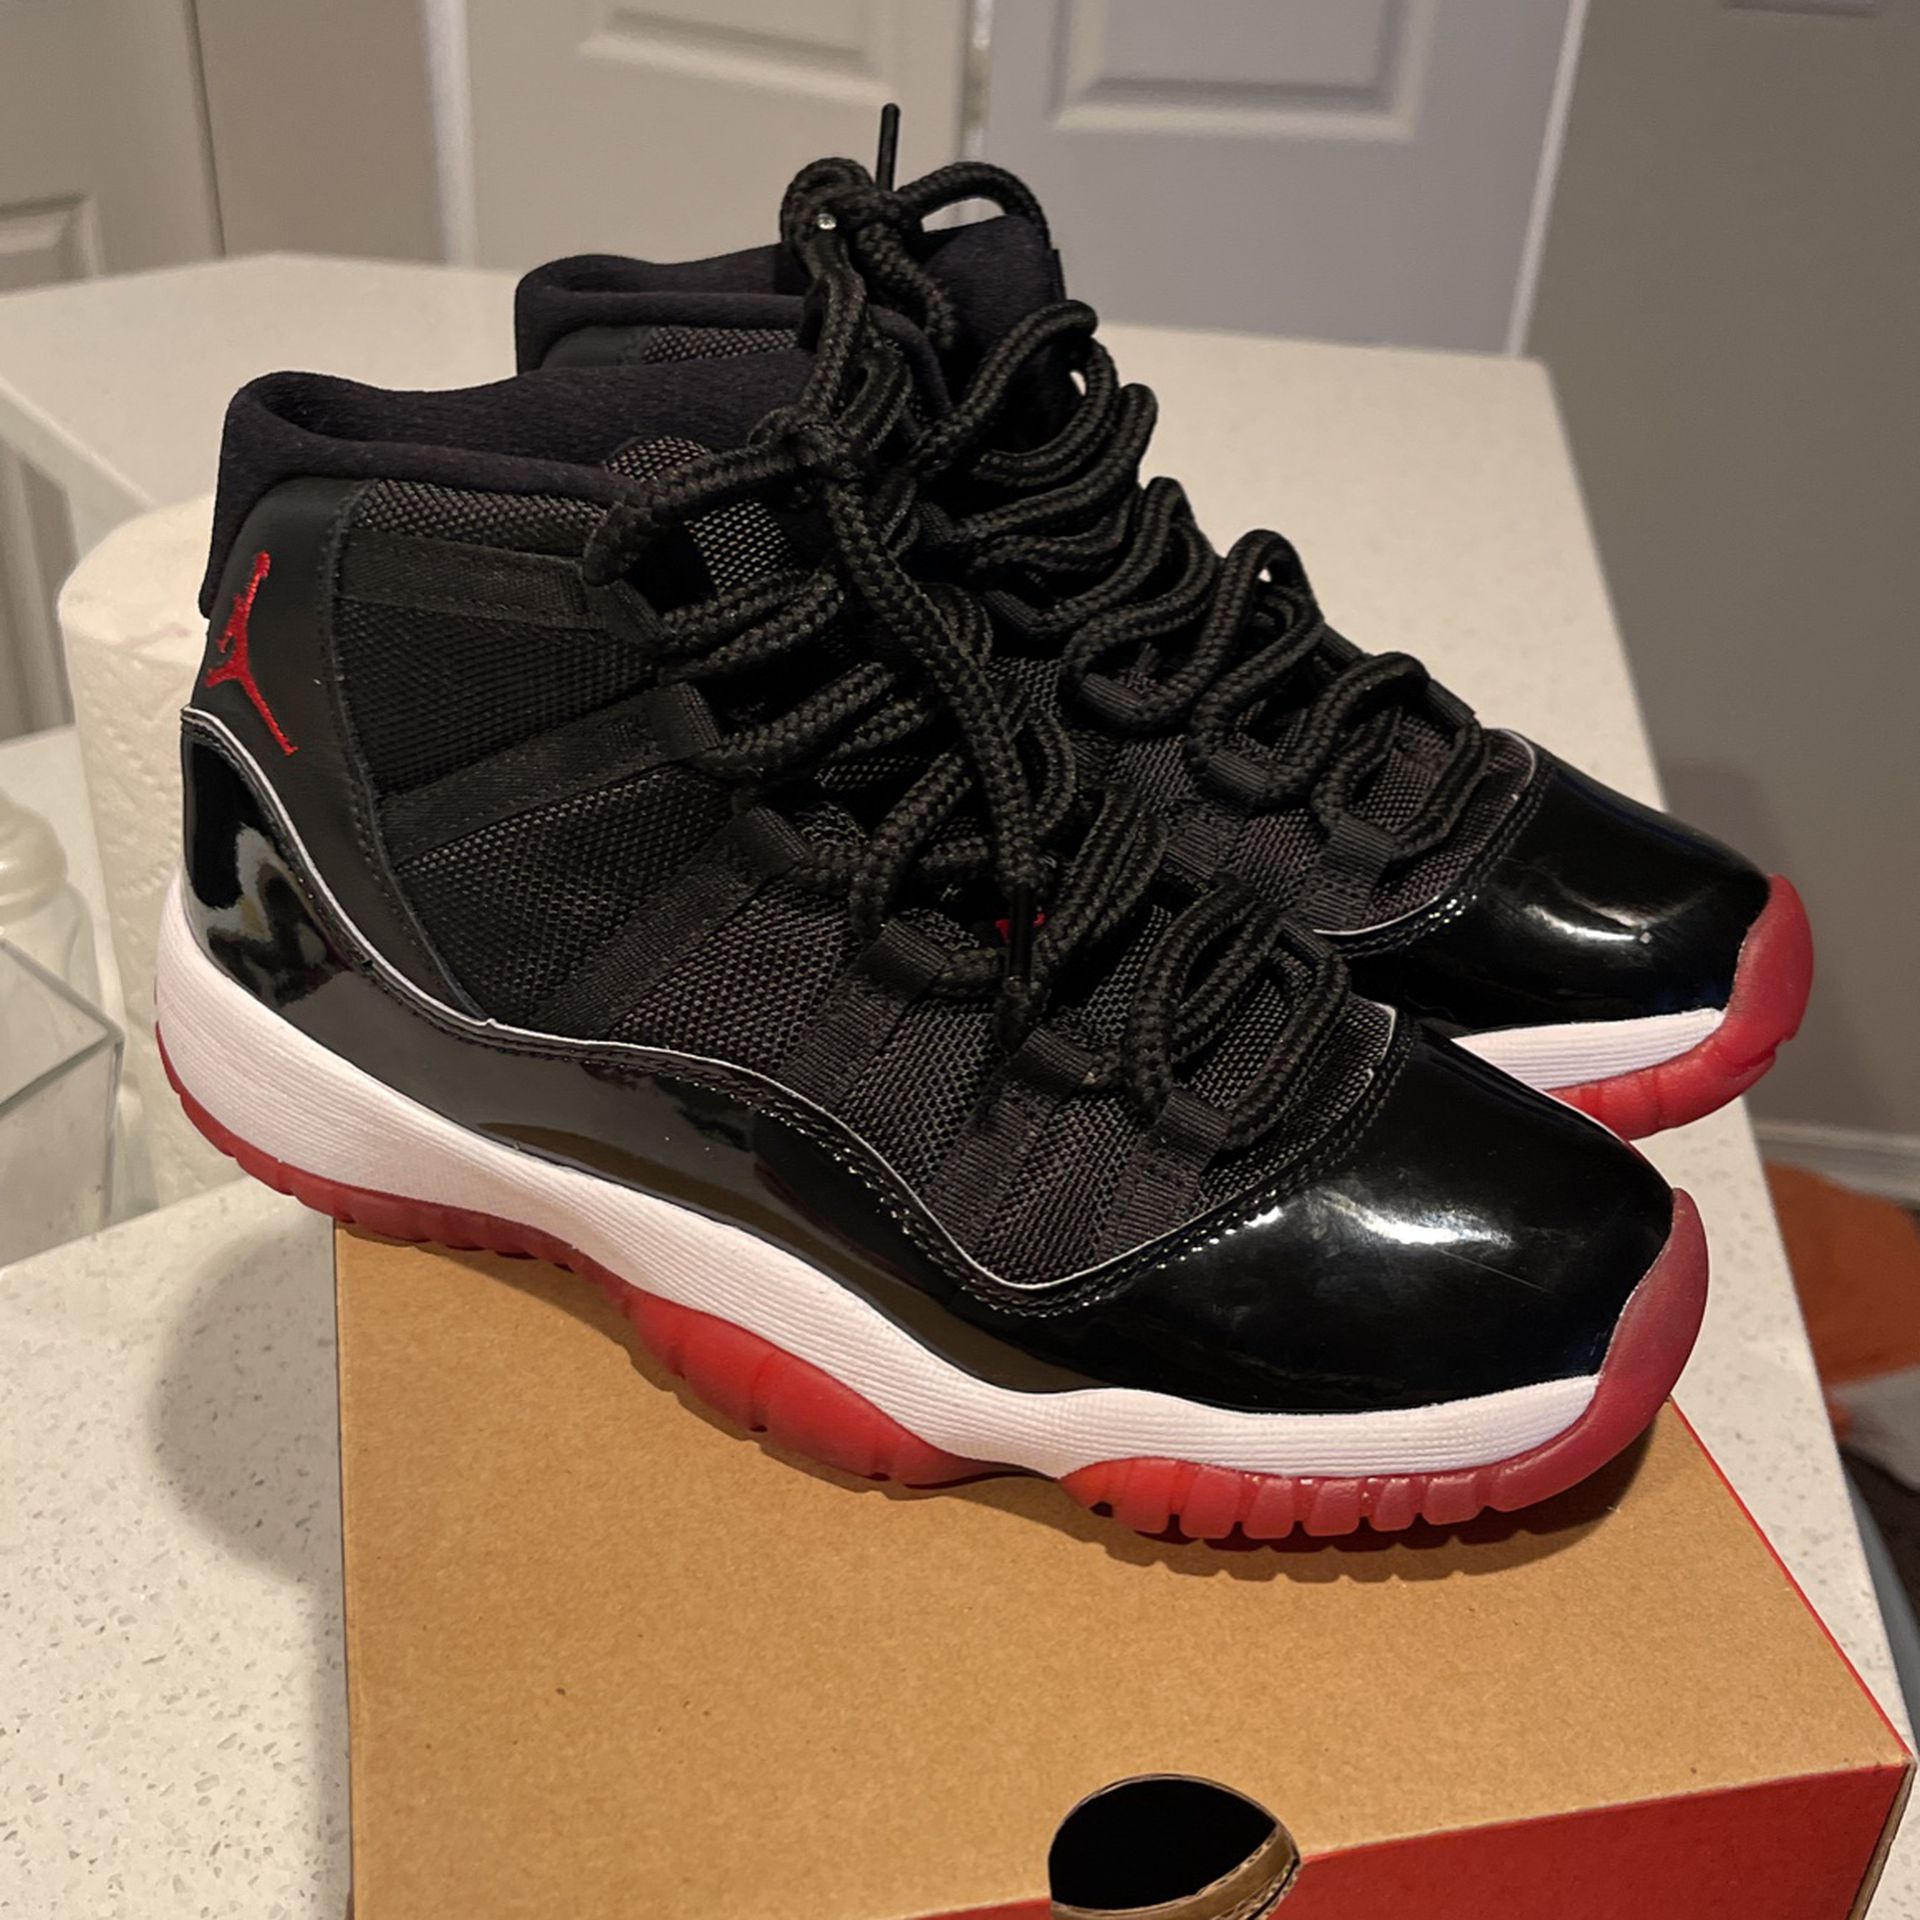 Bred 11 Size 6